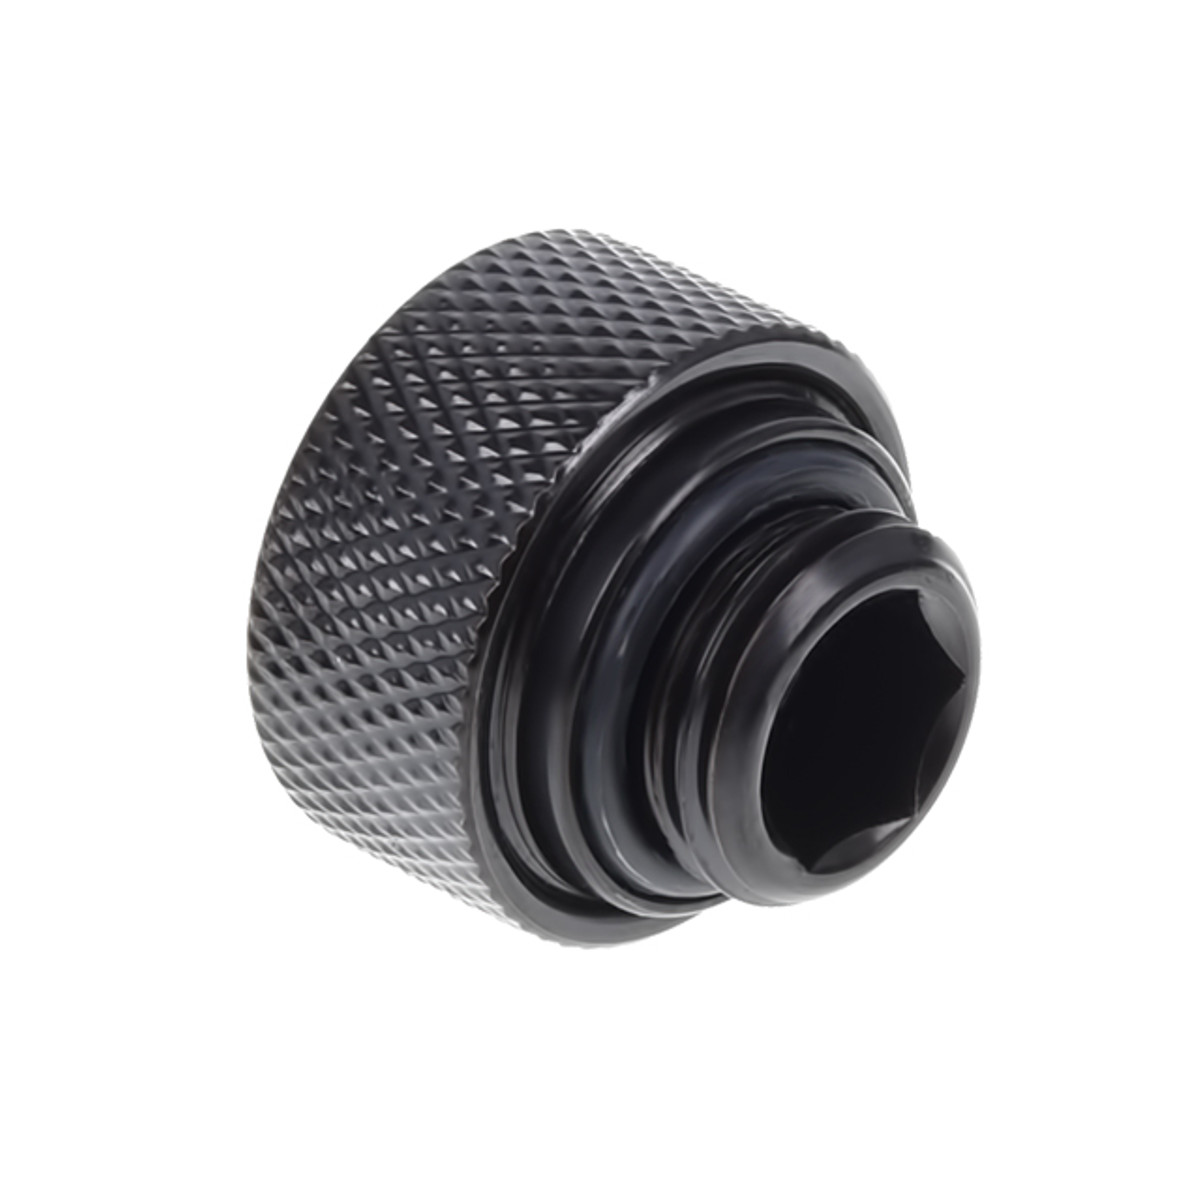 Alphacool - Alphacool Eiszapfen 13mm Deep Black Hard Tube Compression Fittings - Six Pack